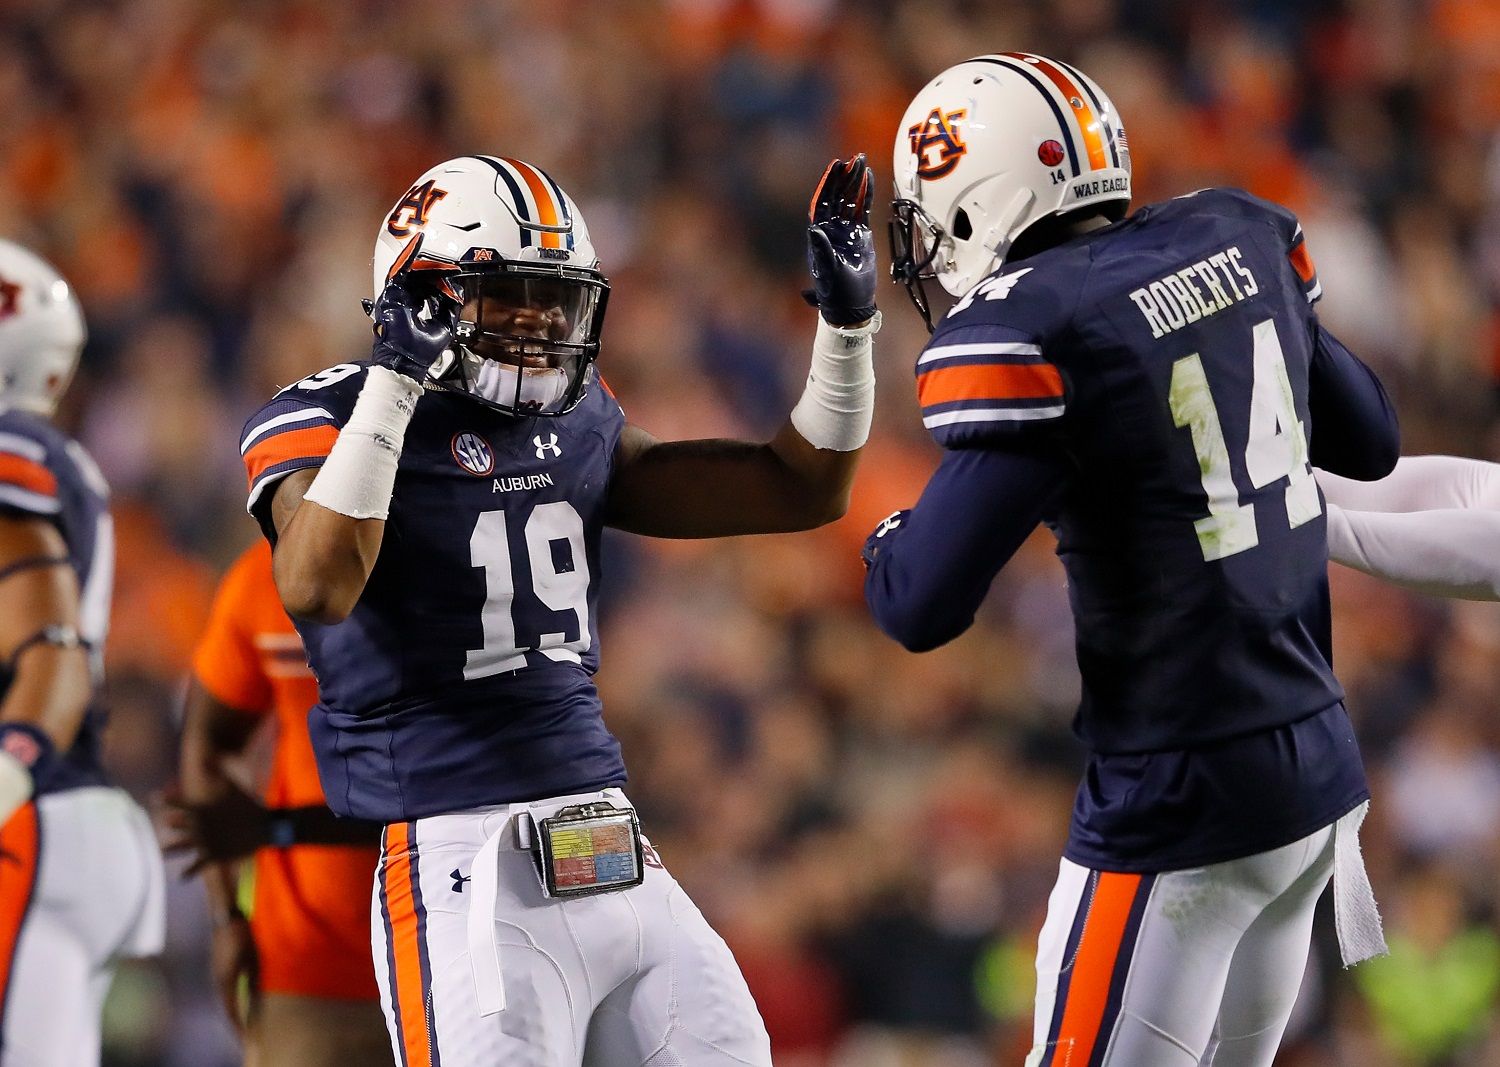 AUBURN, AL - NOVEMBER 25:  Nick Ruffin #19 and Stephen Roberts #14 of the Auburn Tigers celebrate after the victory over the Alabama Crimson Tide at Jordan Hare Stadium on November 25, 2017 in Auburn, Alabama.  (Photo by Kevin C. Cox/Getty Images)